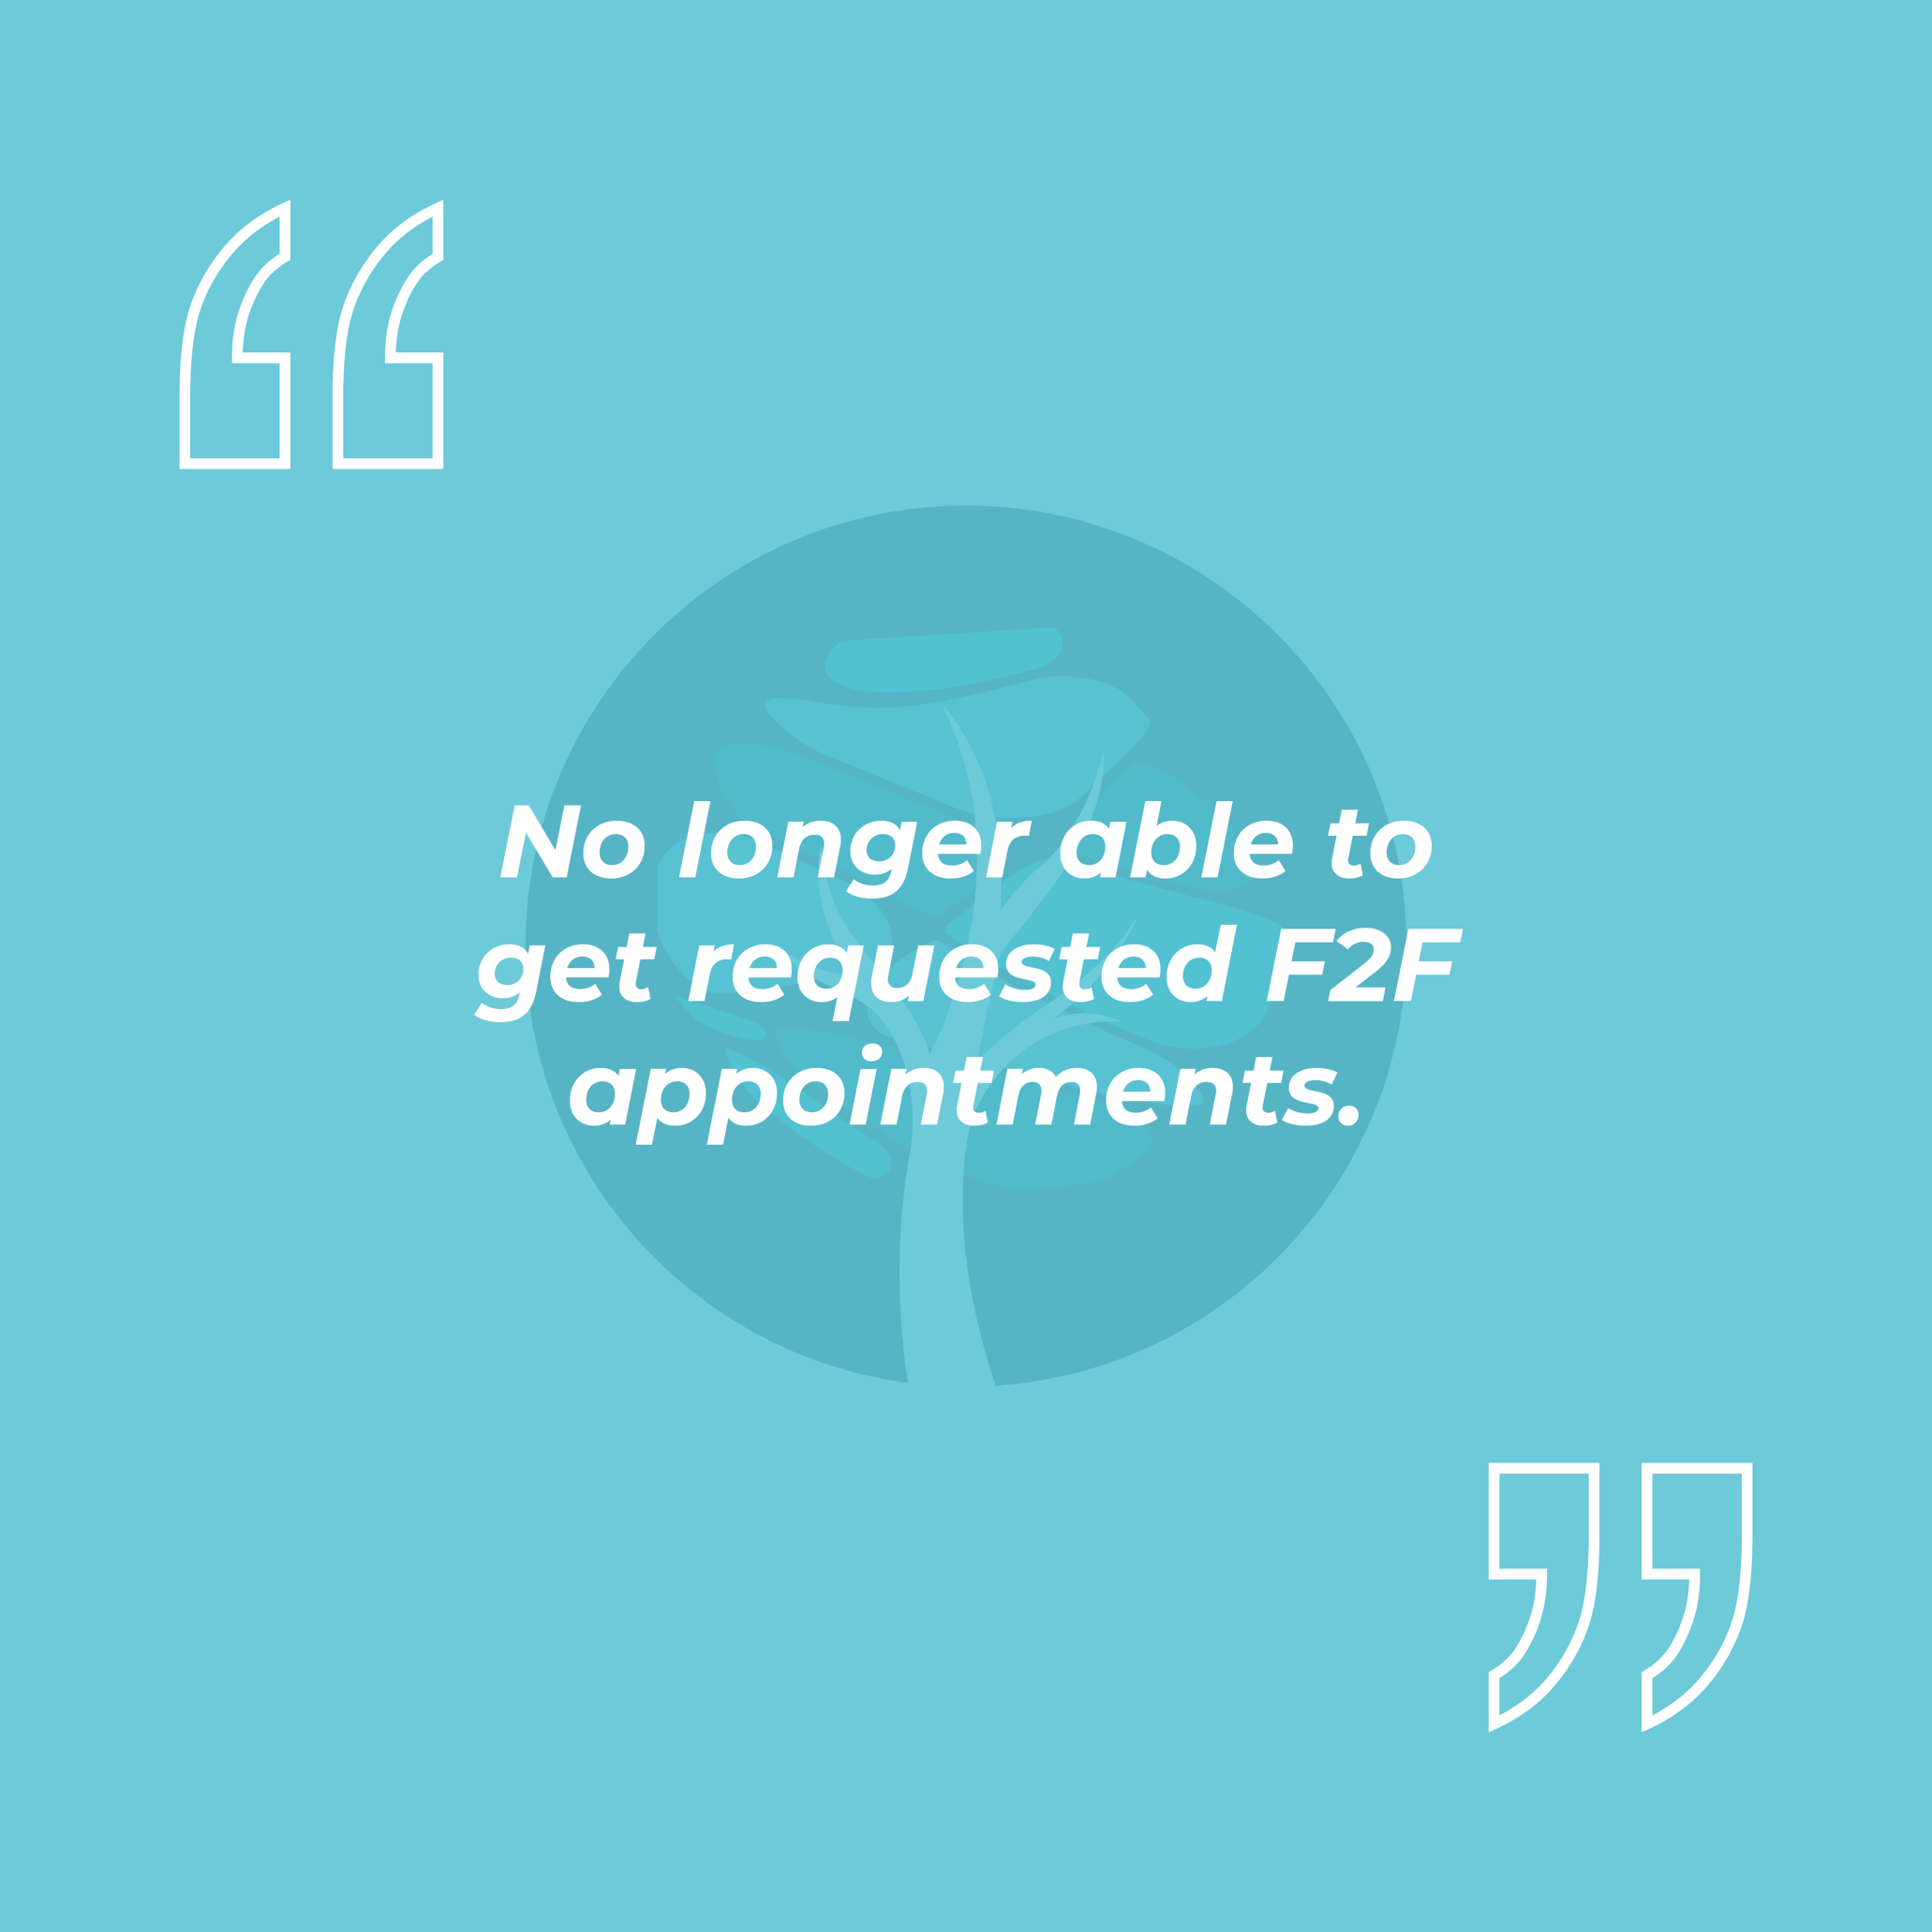 No longer able to get requested F2F appointments.